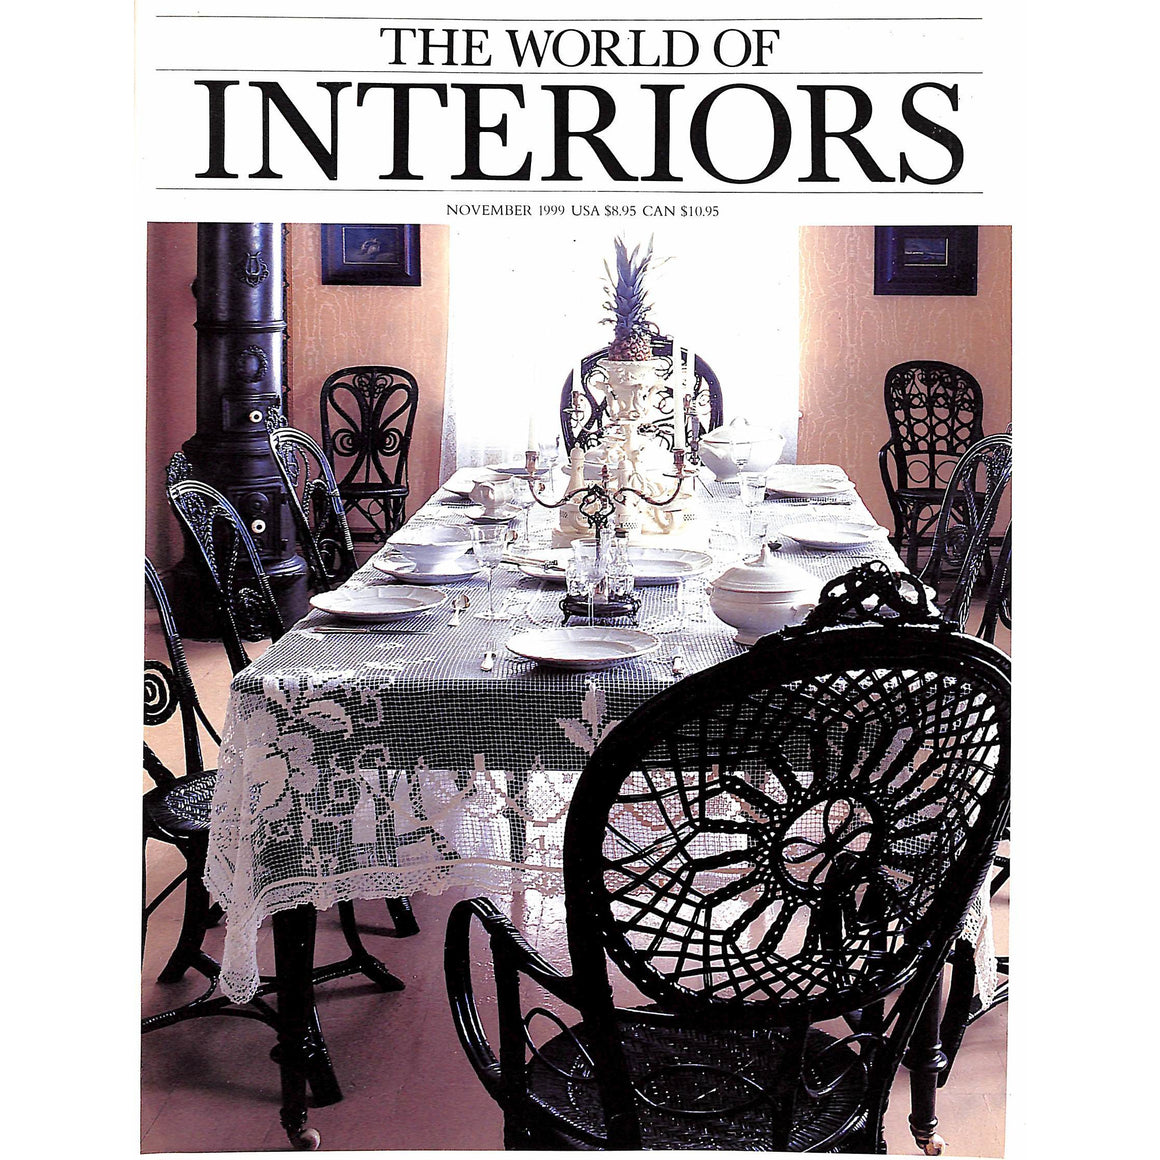 The World of Interiors November 1999 (SOLD)